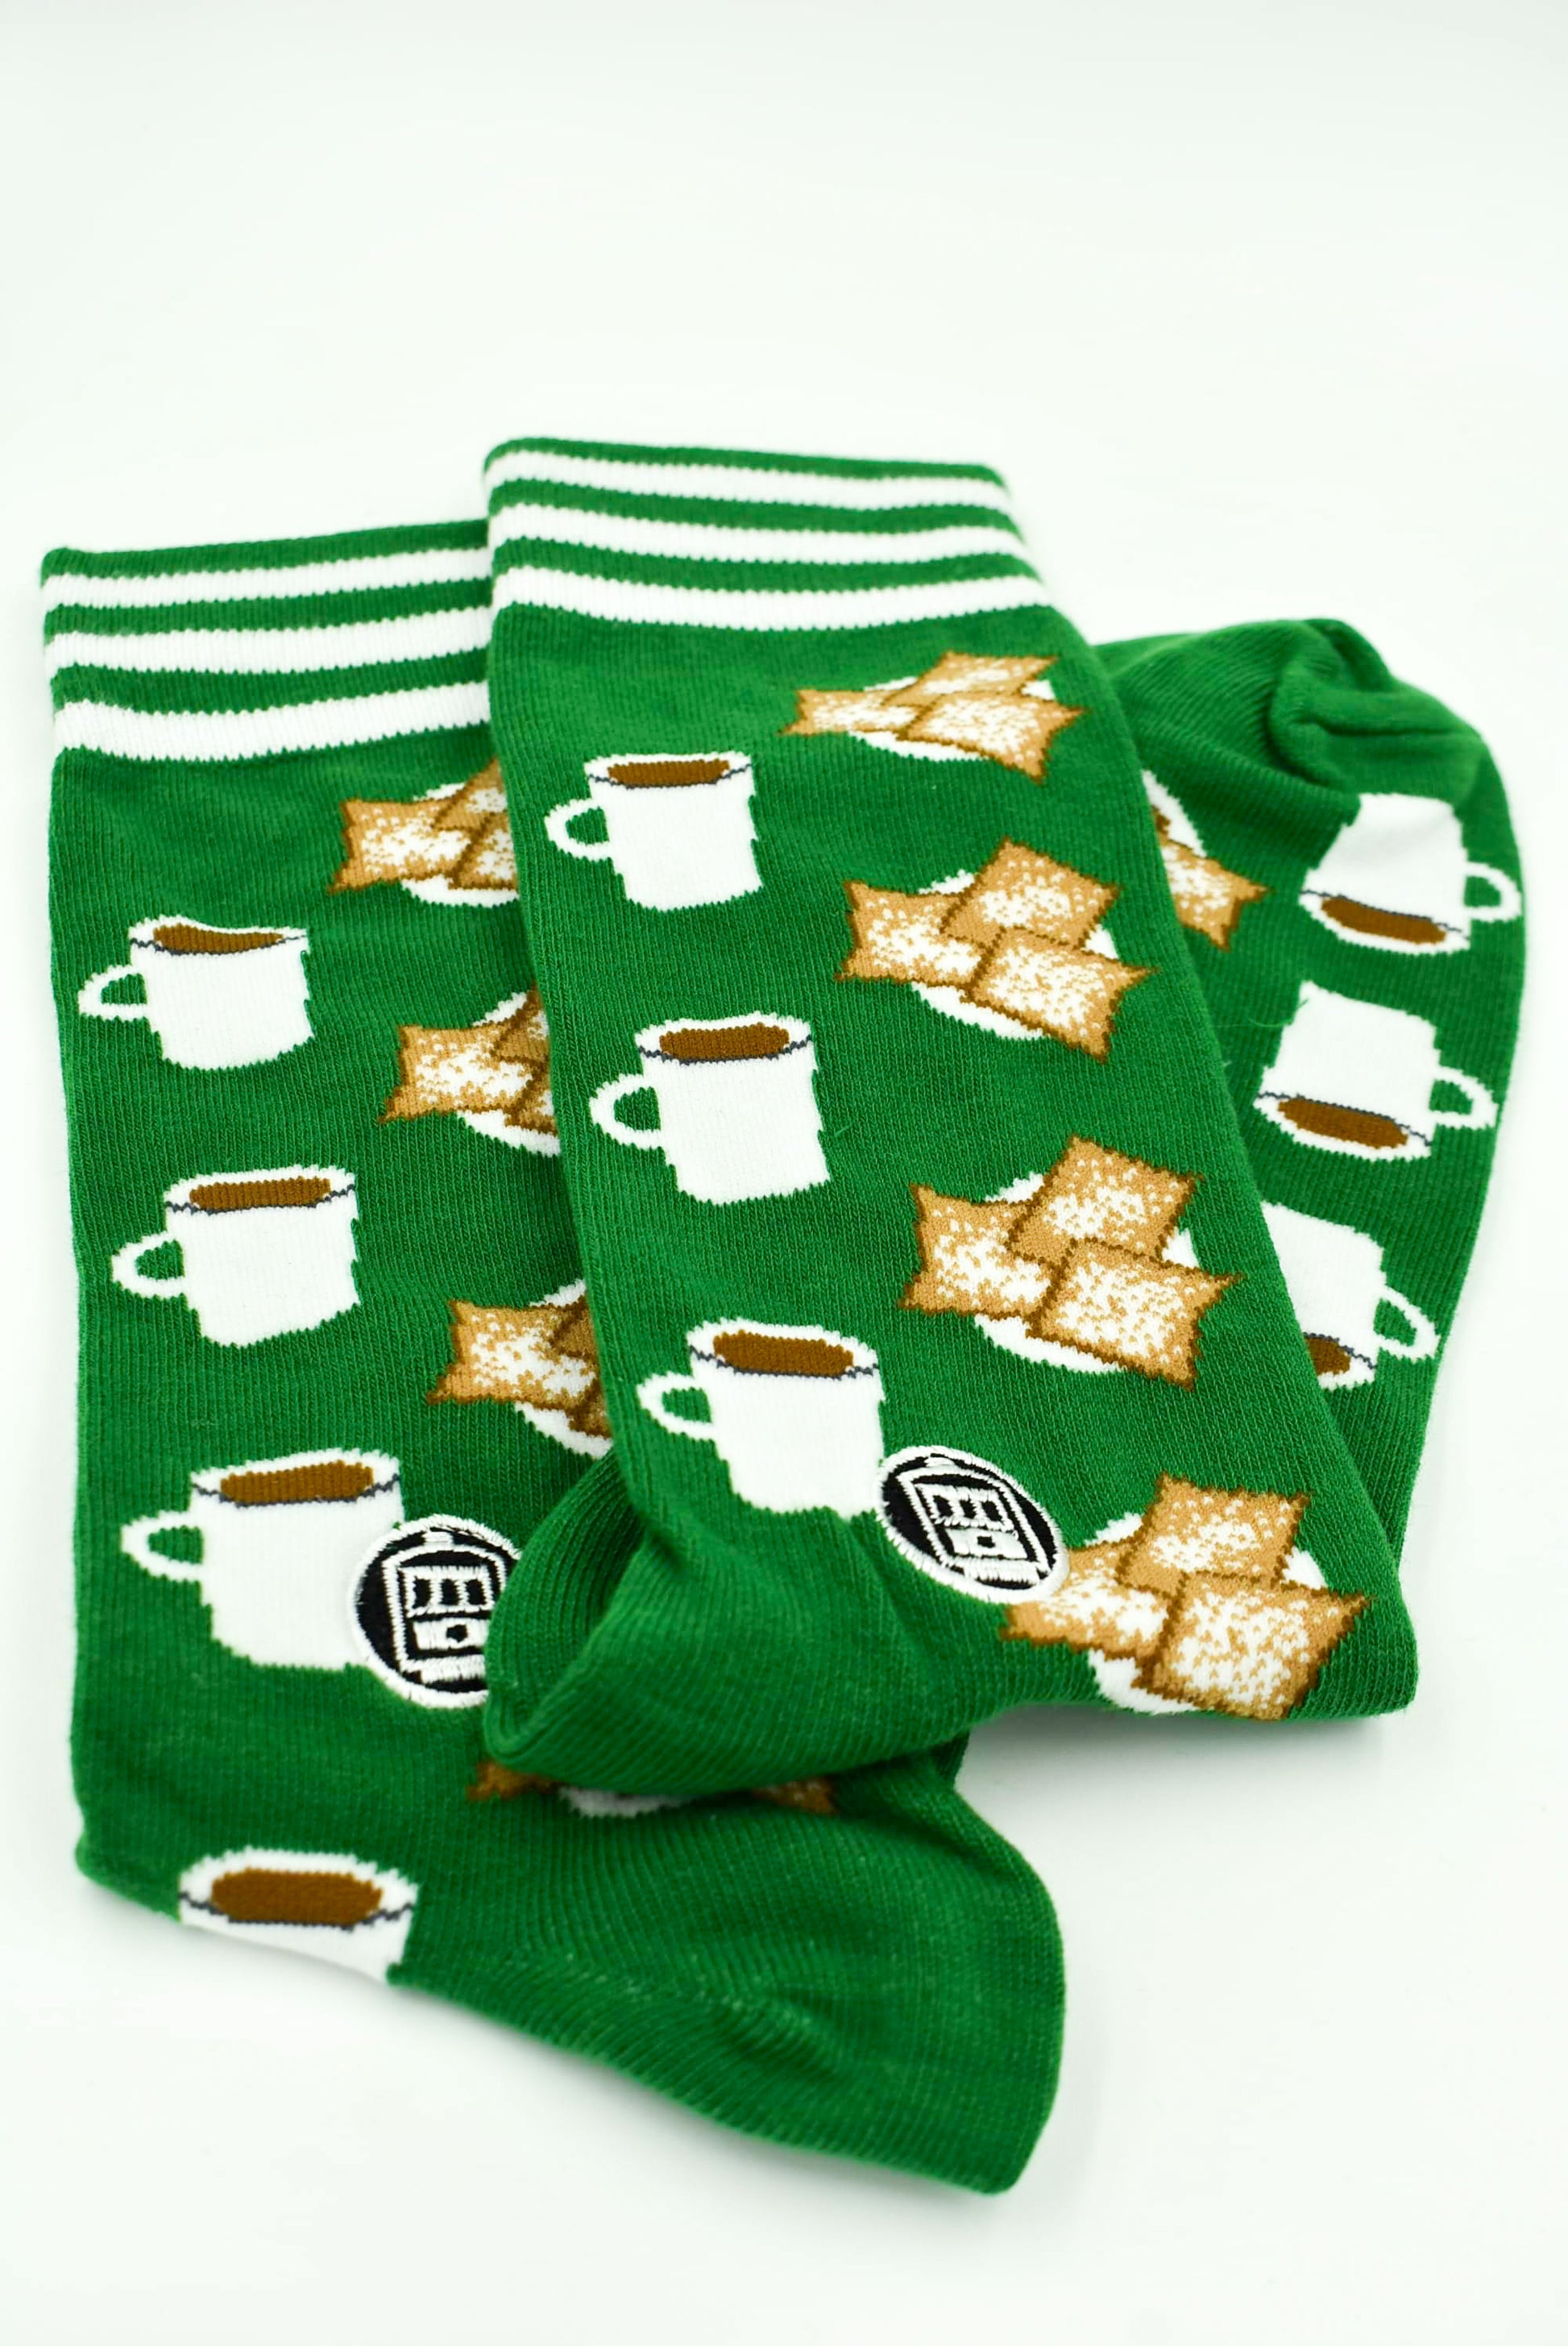 Green and White Unisex Socks with Coffee and Beignet graphics. Crew/Calf socks